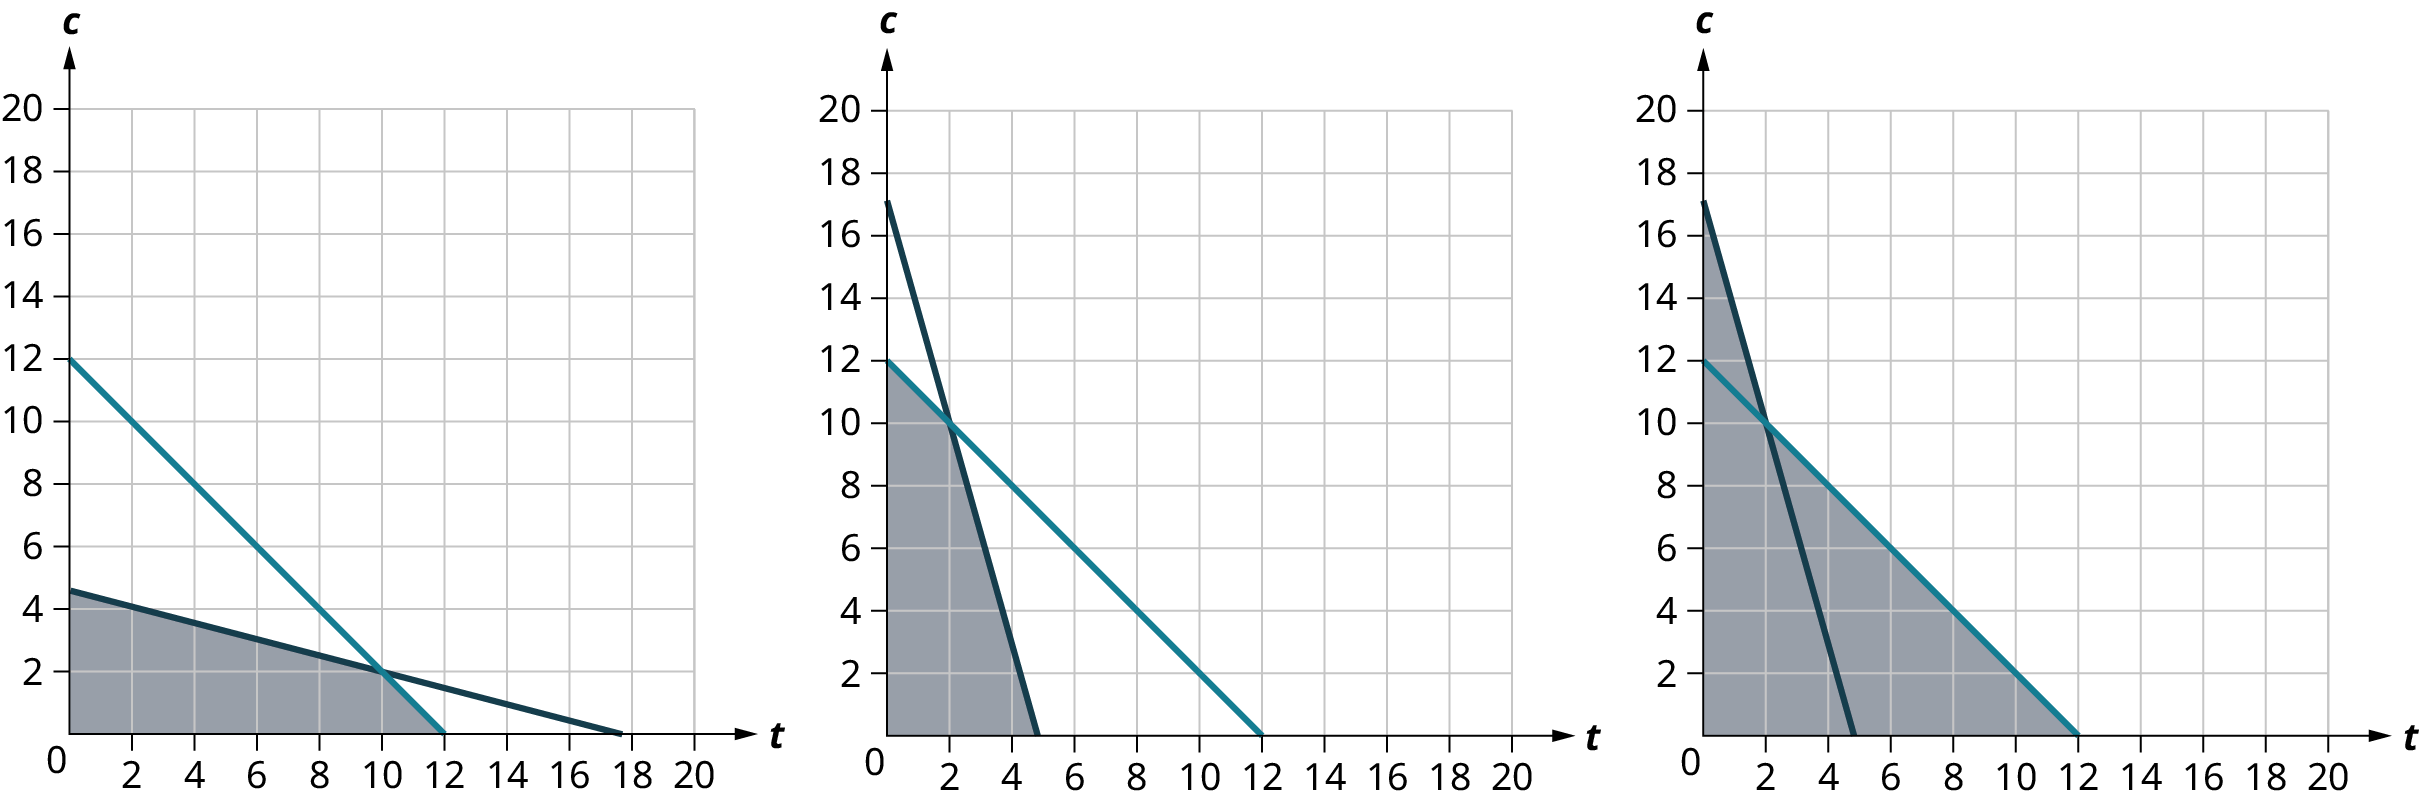 Three coordinate planes. Two lines are plotted on each coordinate plane. The horizontal and vertical axes range from 0 to 20, in increments of 2. On the first coordinate plane, the first line passes through the points, (0, 12), (6, 6), and (12, 0). The second line passes through the points, (0, 4.5), (6, 3), and (17.5, 0). The two lines intersect at (10, 2). The region below the intersection point and within the lines is shaded. On the second coordinate plane, the first line passes through the points, (0, 17), (3, 6), and (5, 0). The second line passes through the points, (0, 12), (6, 6), and (12, 0). The two lines intersect at (2, 10). The region below the intersection point and within the lines is shaded. On the third coordinate plane, the first line passes through the points, (0, 17), (3, 6), and (5, 0). The second line passes through the points, (0, 12), (6, 6), and (12, 0). The two lines intersect at (2, 10). The region below each line is shaded. Note: all values are approximate.